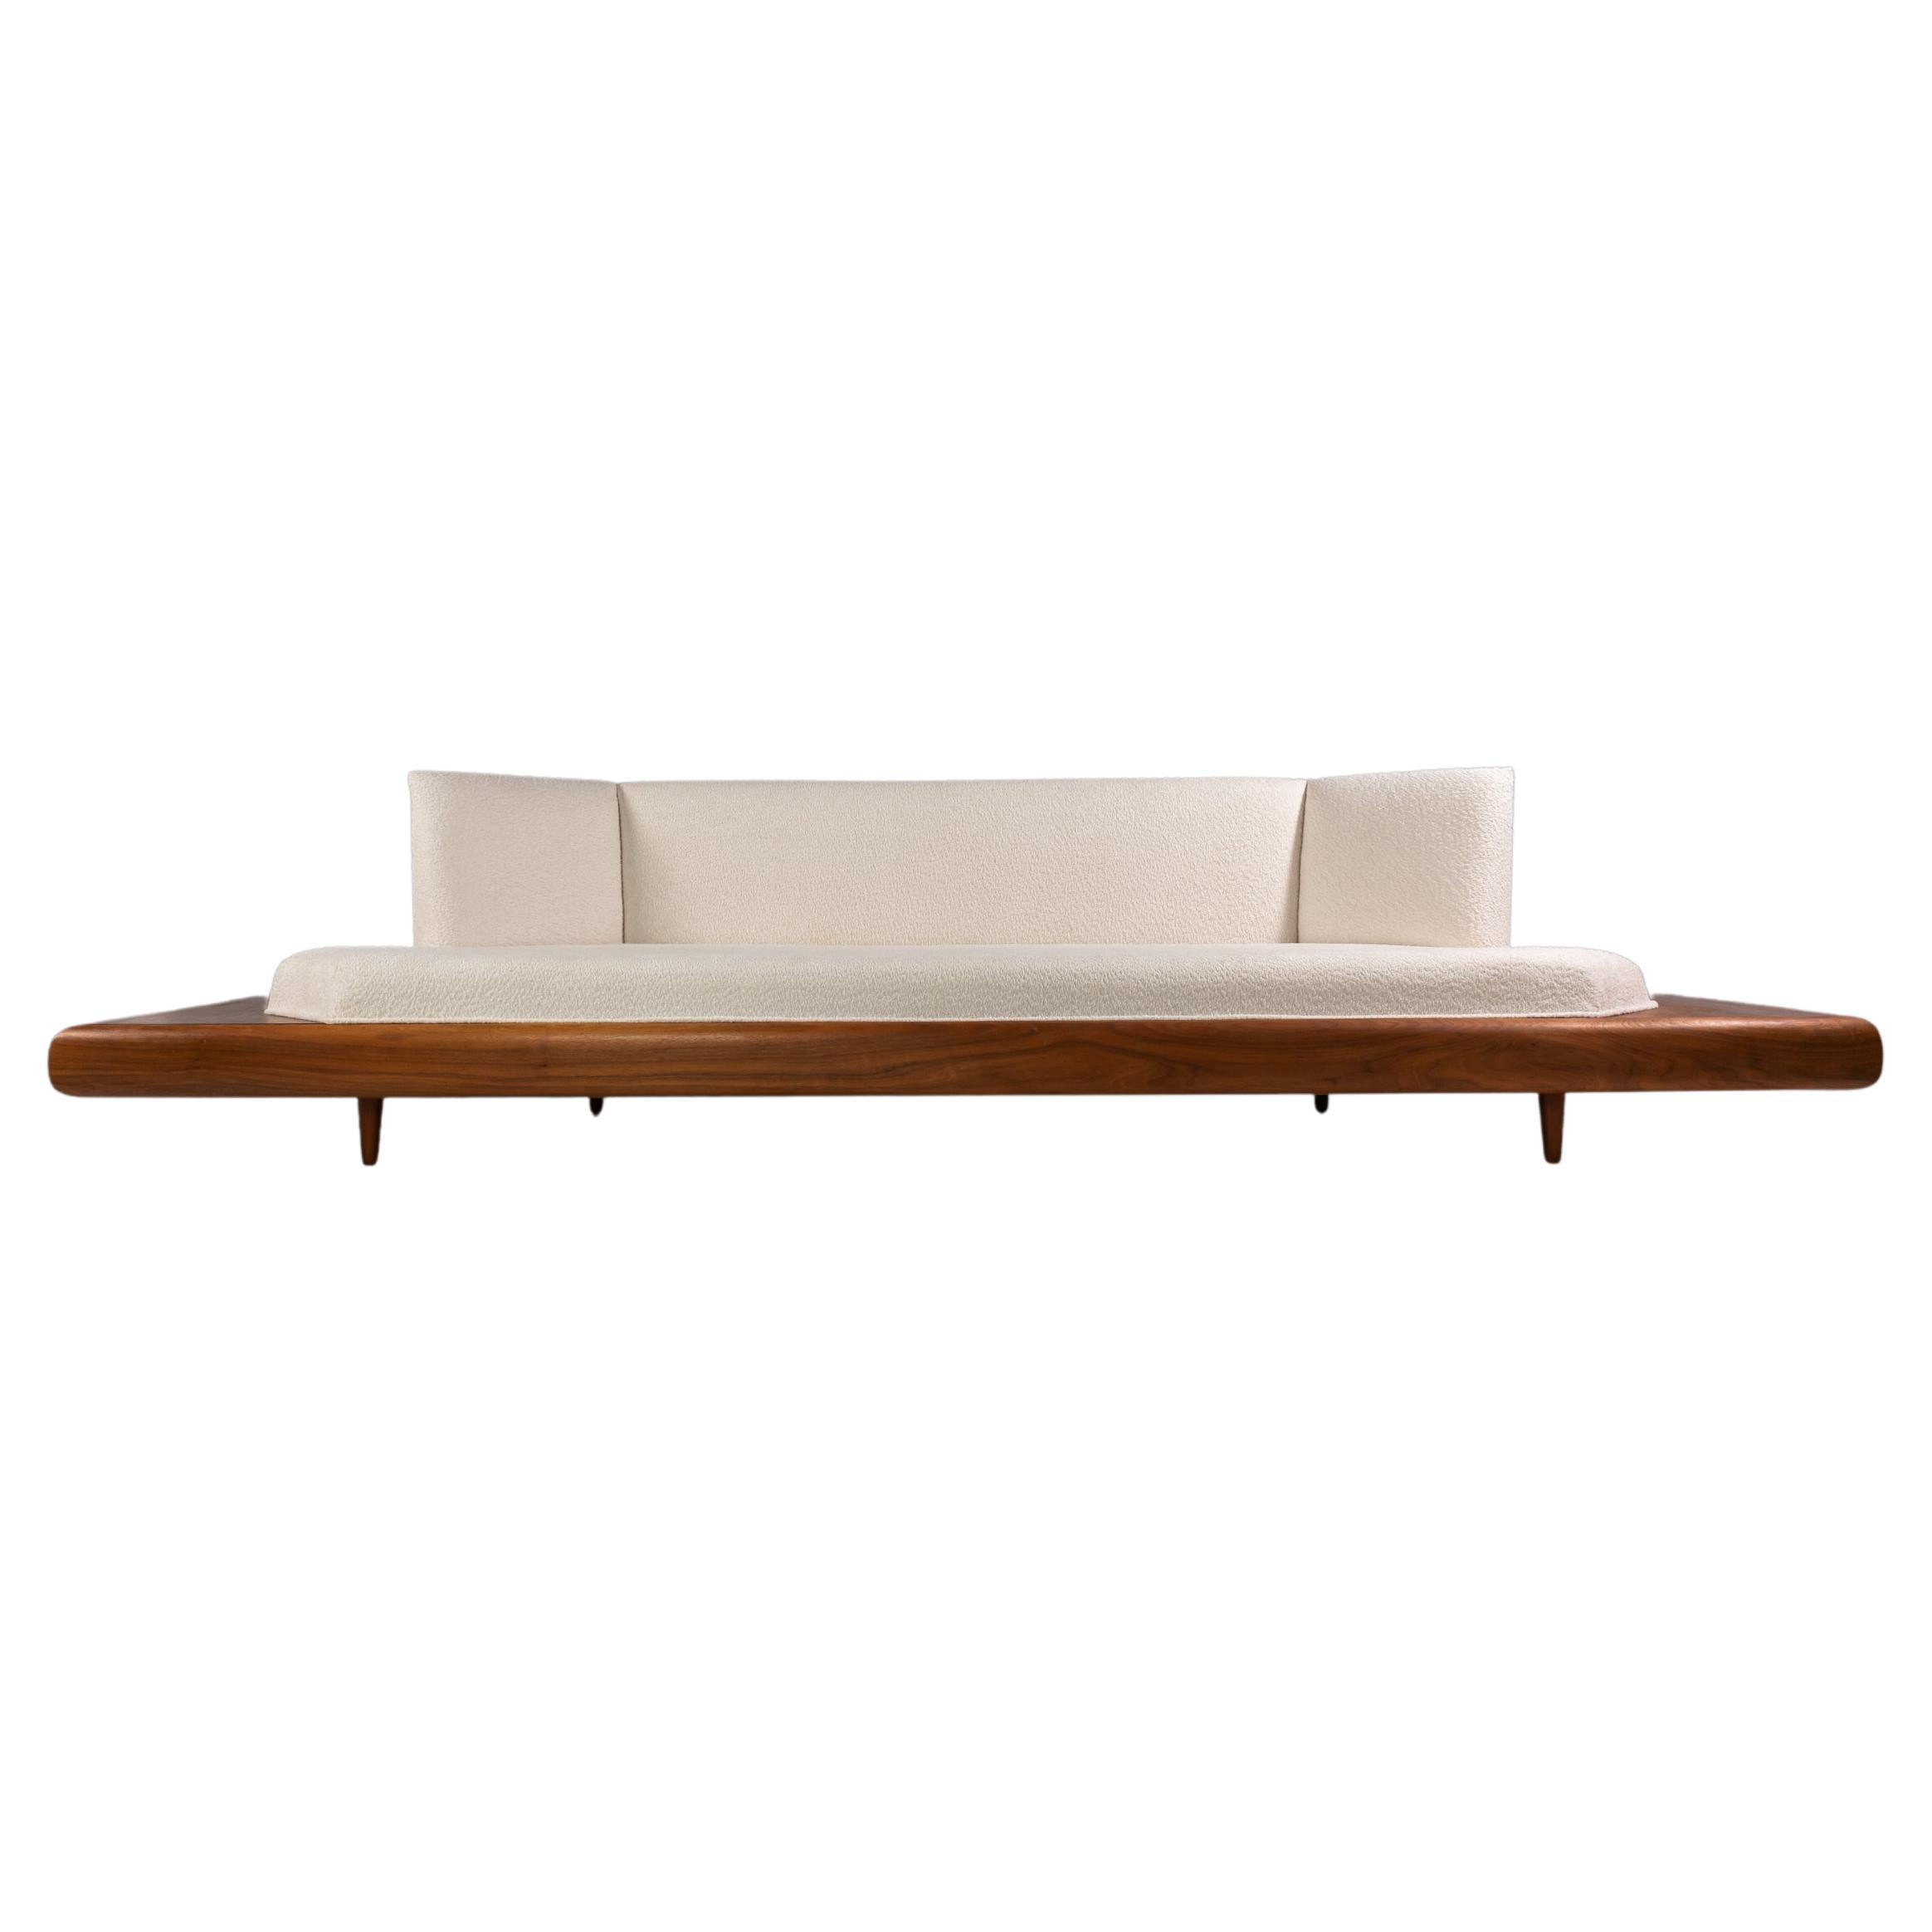 Model 2006-S Platform Sofa in Walnut & Bouclé by Adrian Pearsall for Craft 1960s For Sale